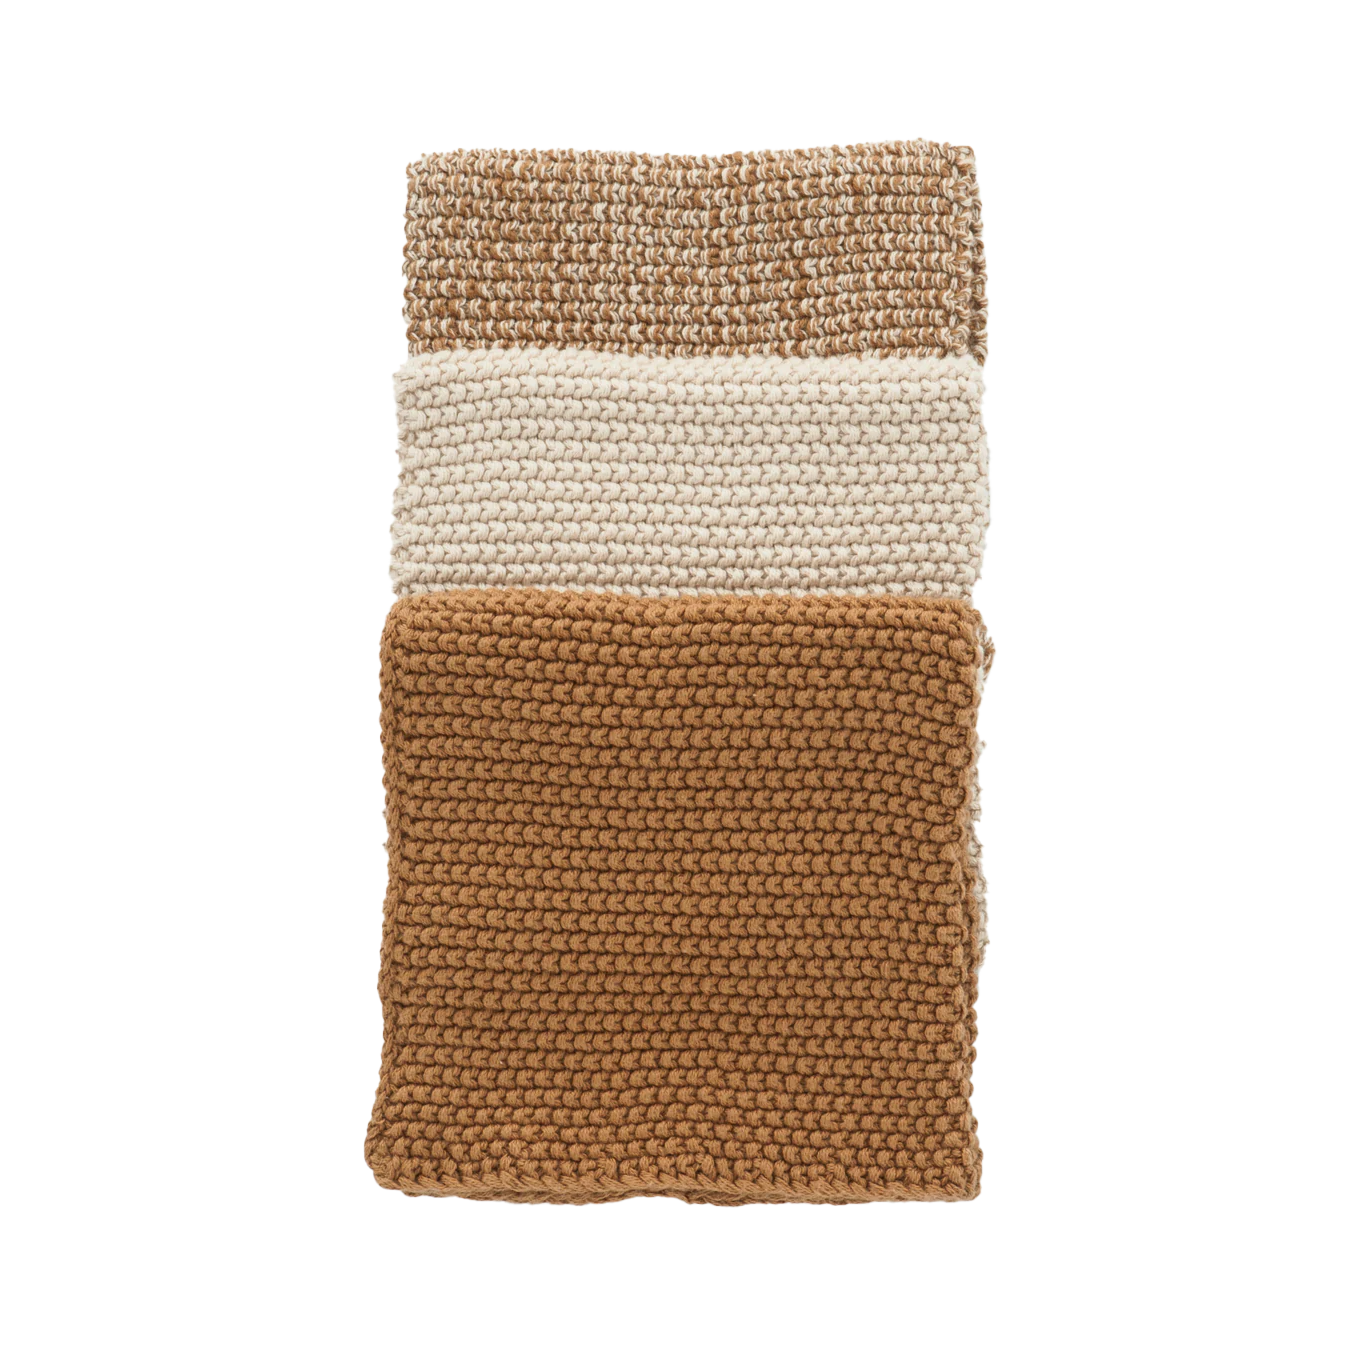 Cotton knitted cloths set of 3